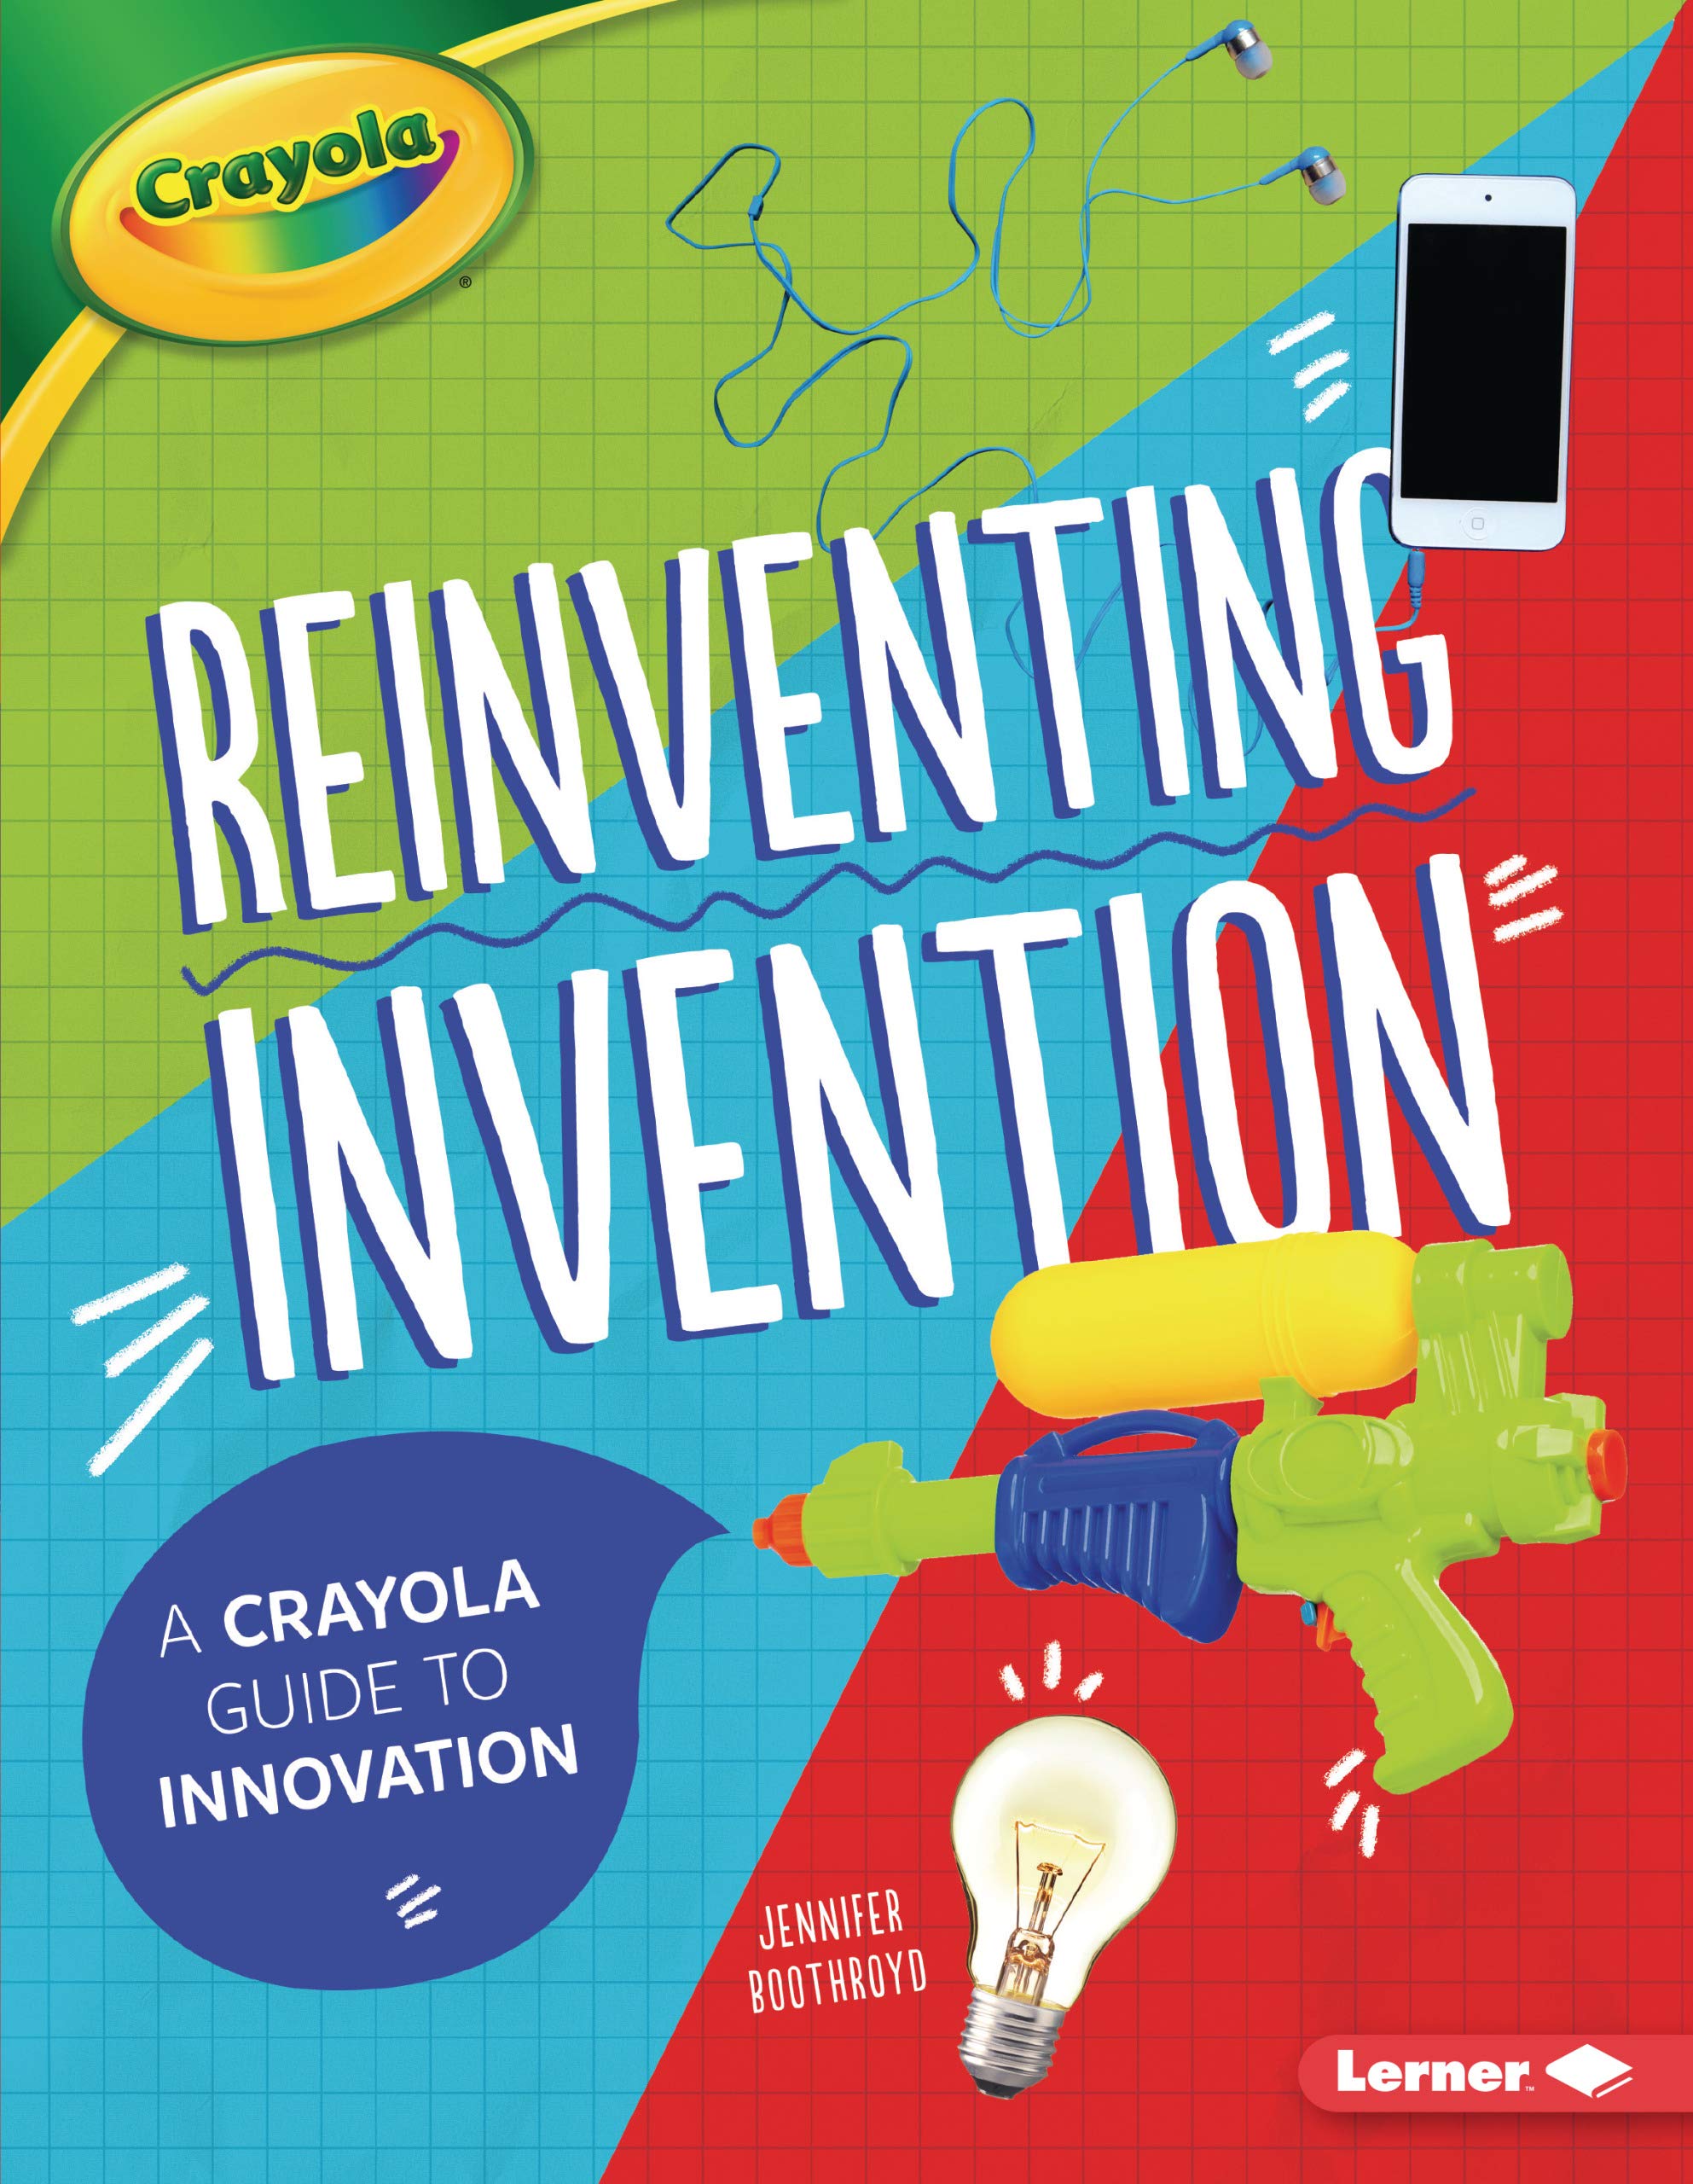 Reinventing Invention: A Crayola Guide to Innovation